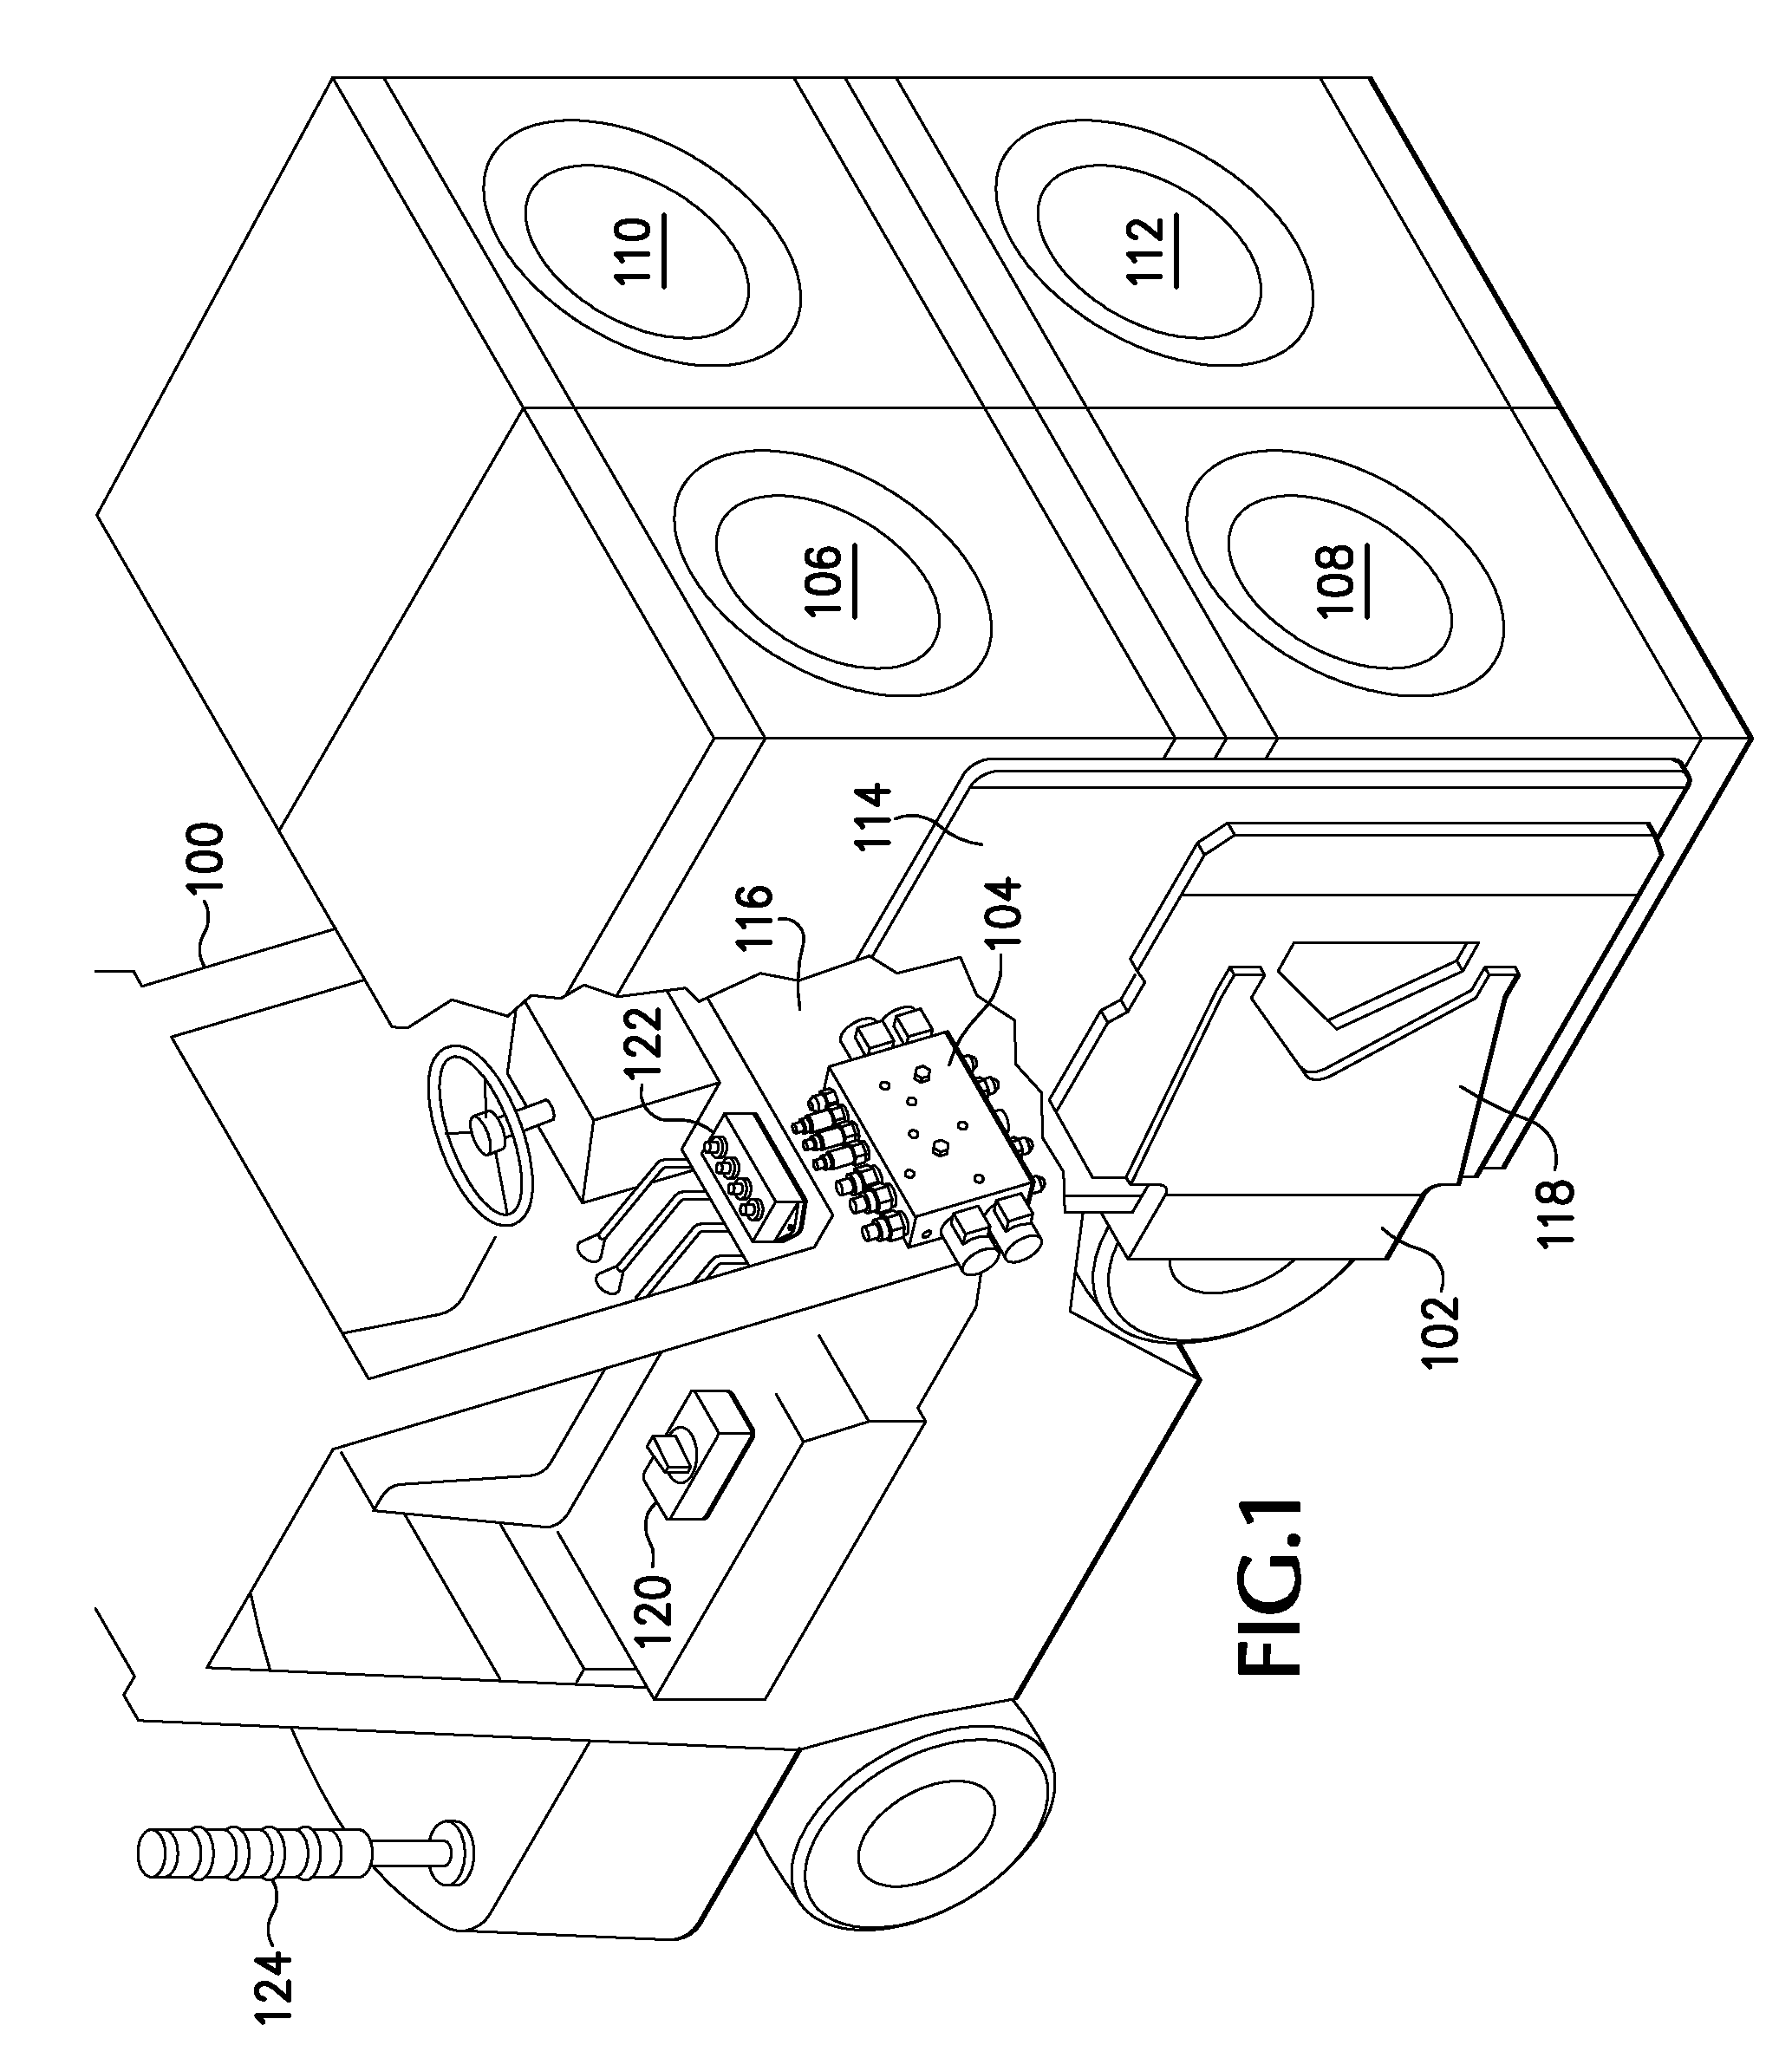 Hydraulic valve circuit with damage-control override